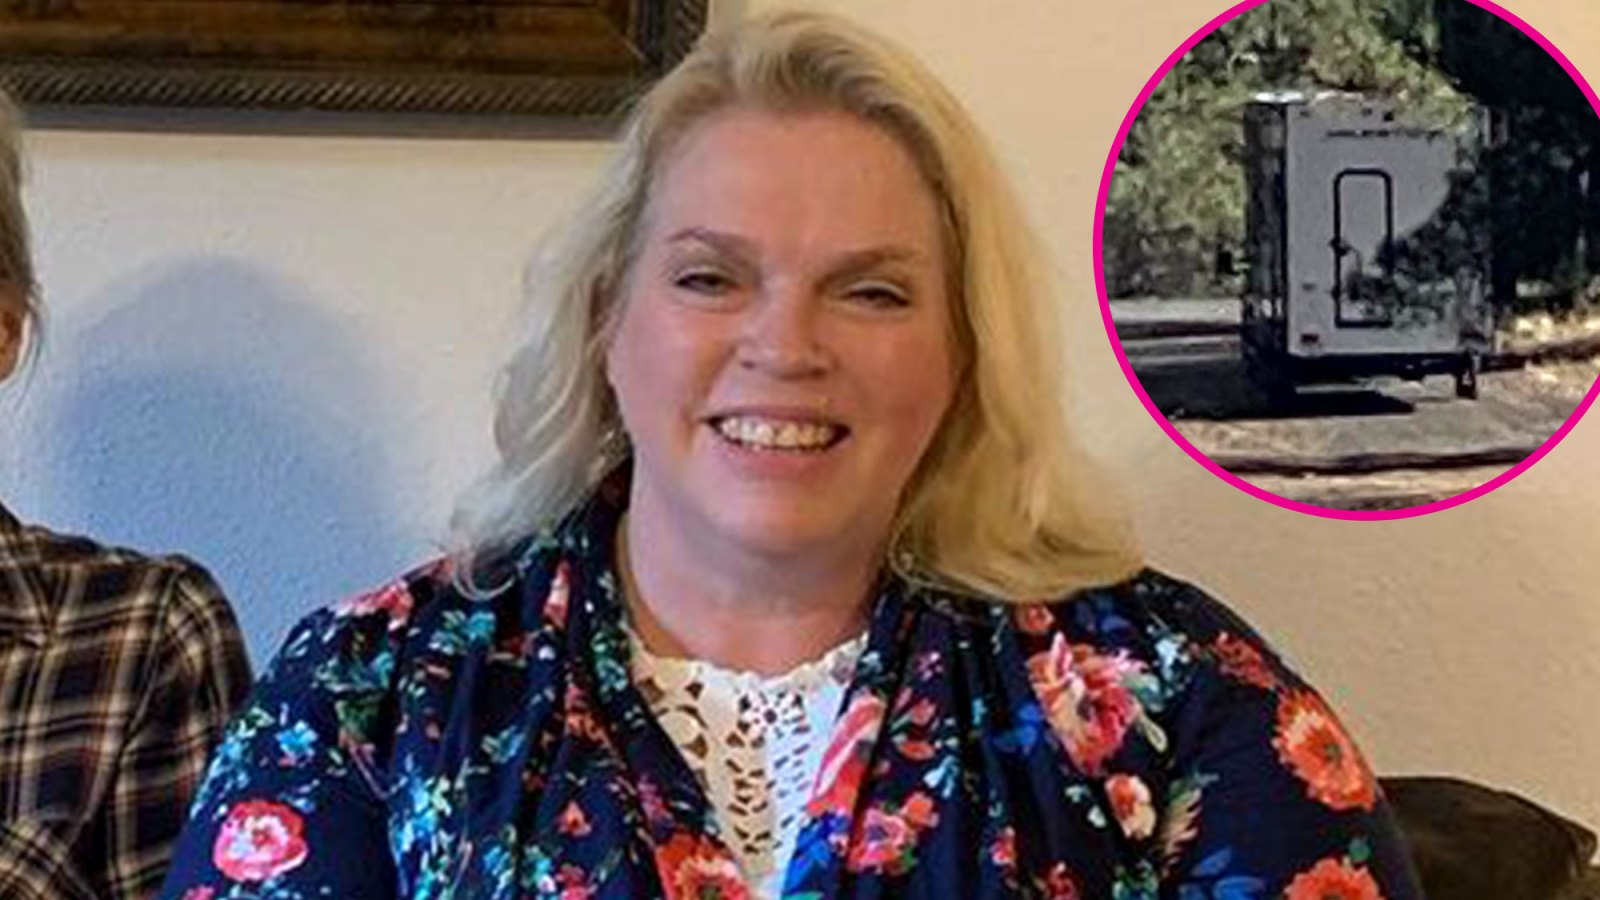 Sister Wives' Janelle Brown Officially Moves Out of RV: 'So Long'